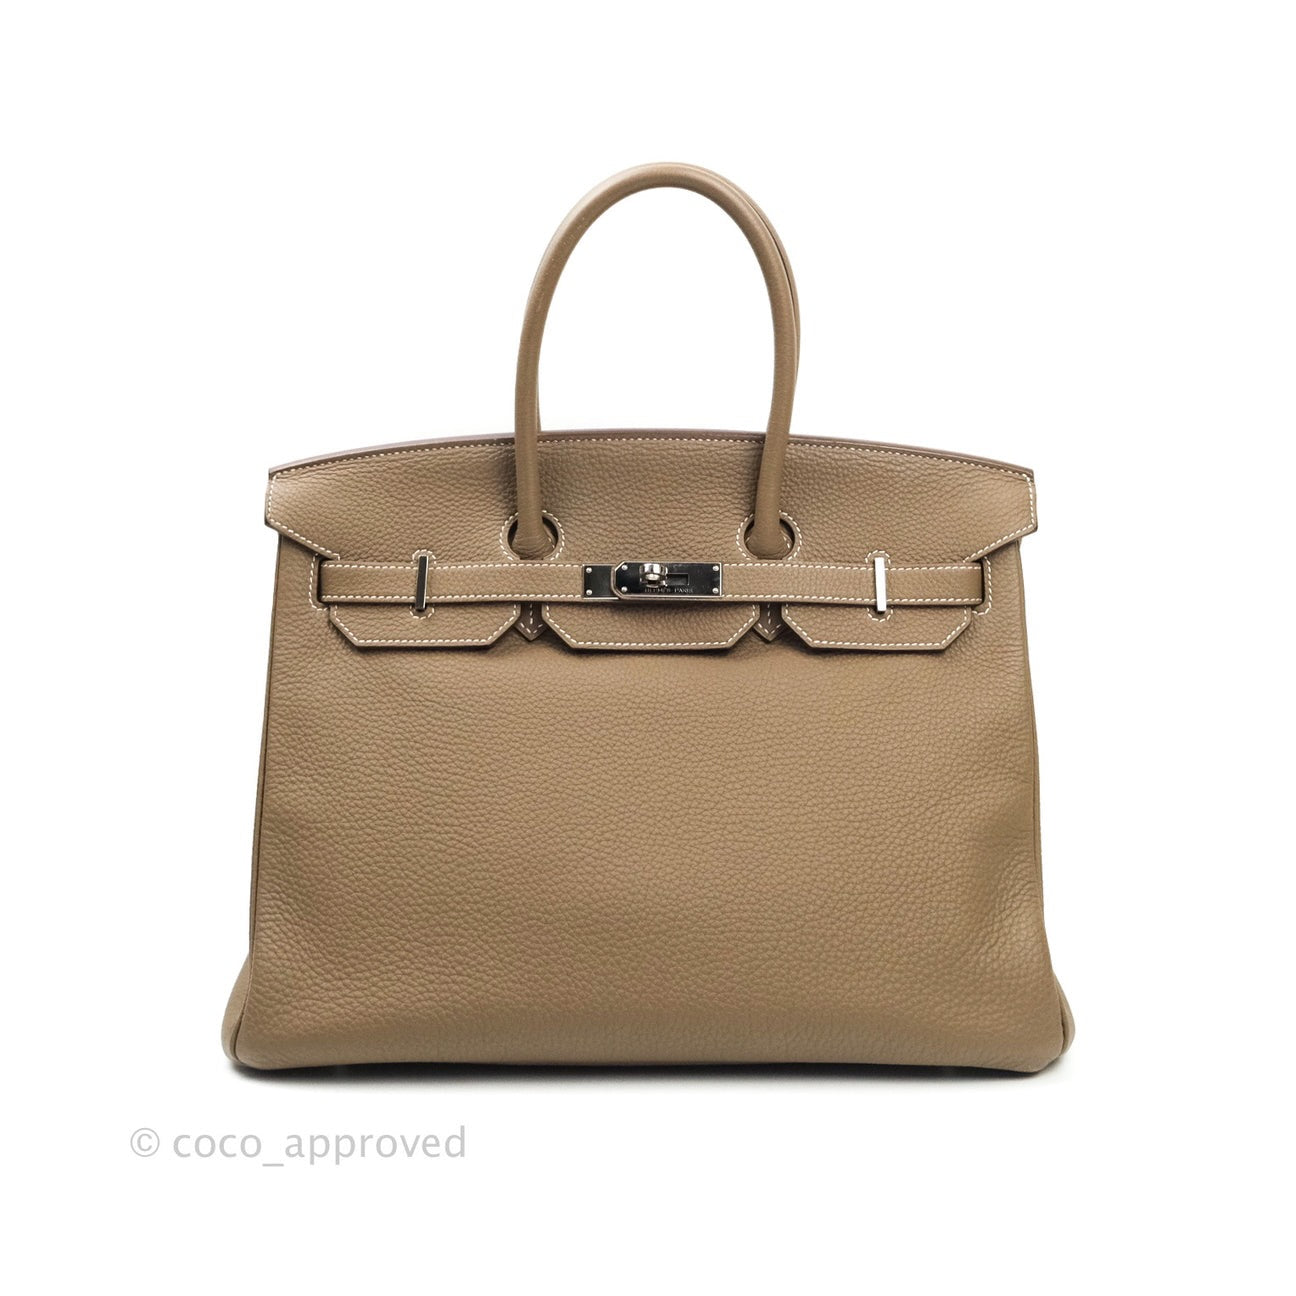 MY TOP 10 FAVOURITE HERMES COLOURS